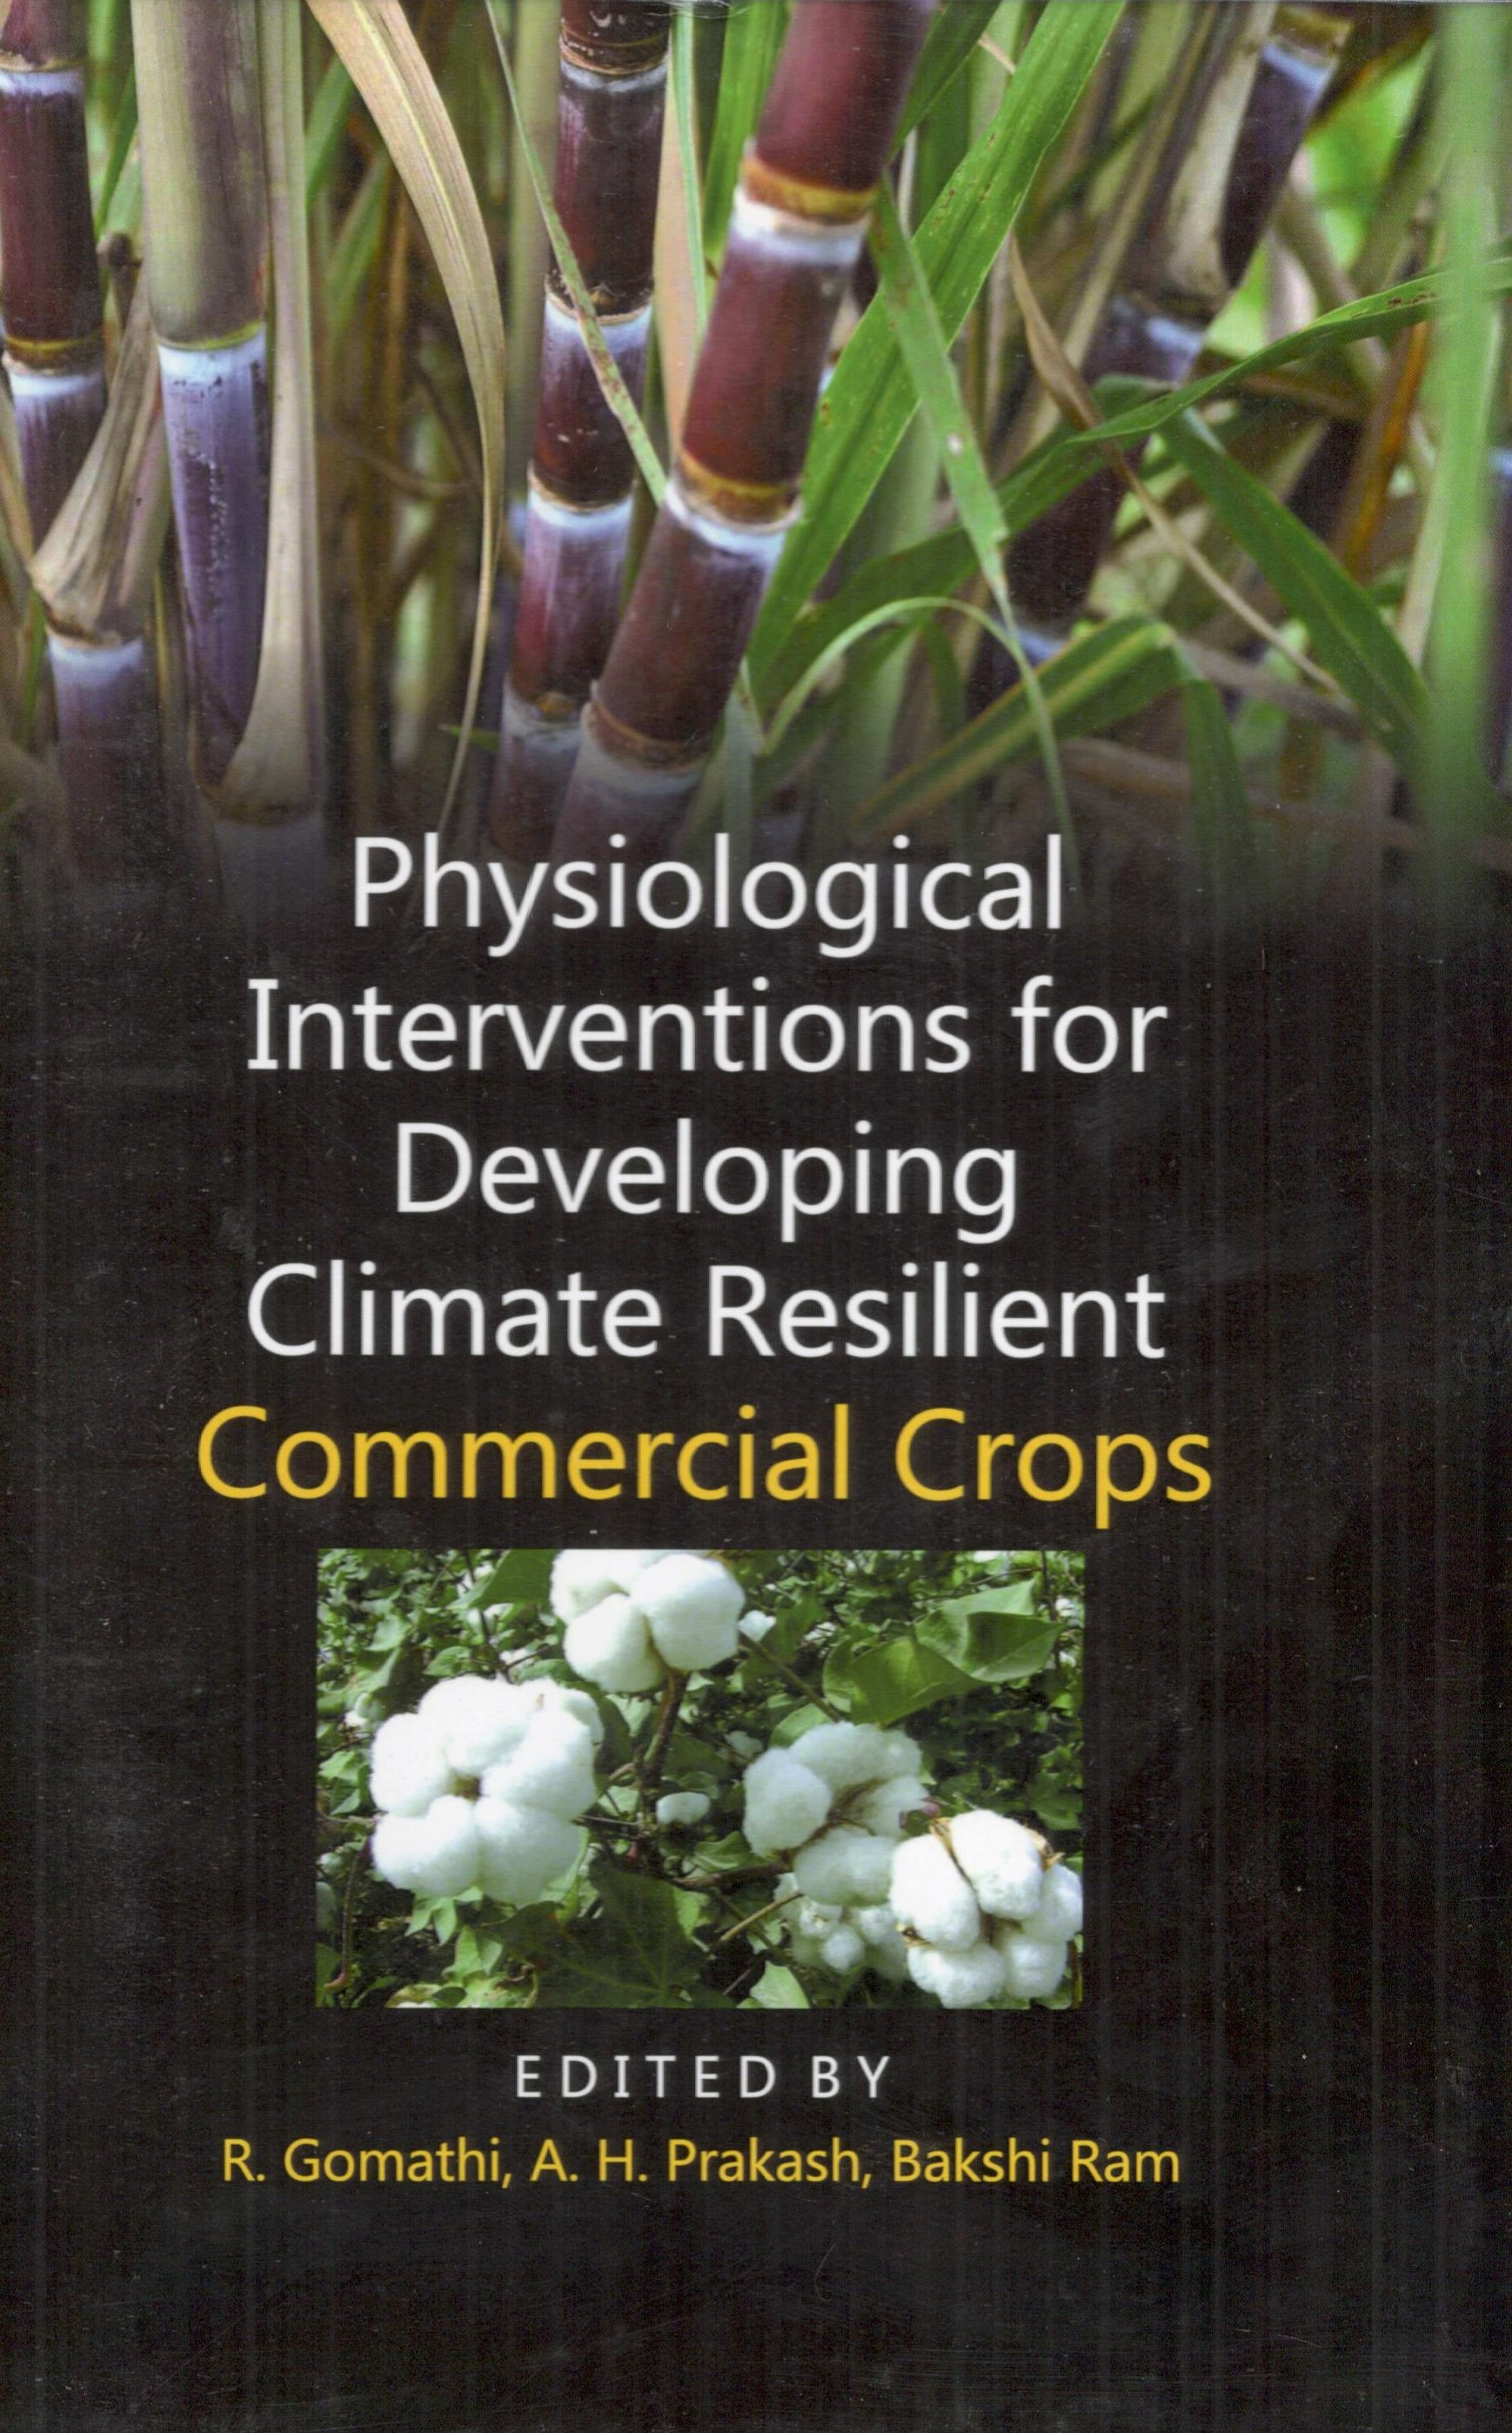 Physiological Interventions for Developing Climate Resilient Commercial Crops